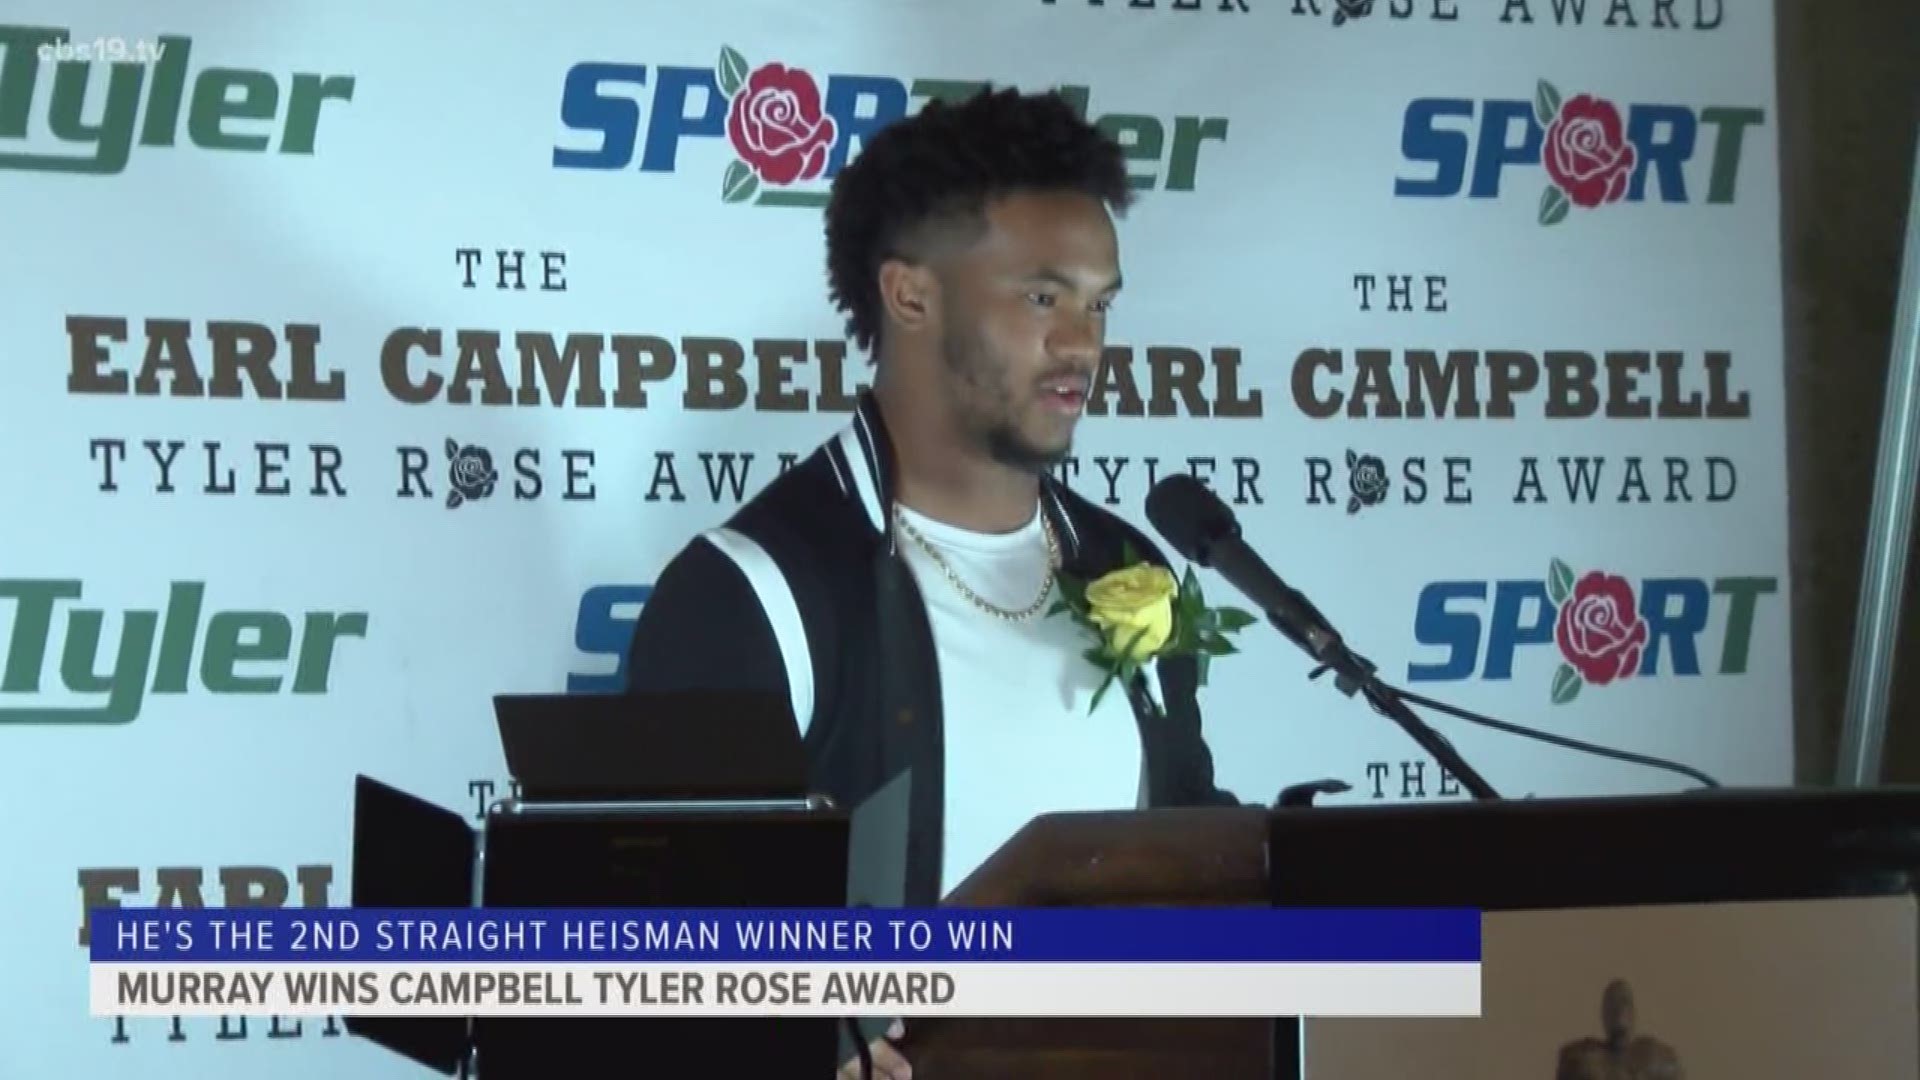 For the 2nd straight year, the Heisman Trophy winner also wins the Earl Campbell Tyler Rose Award